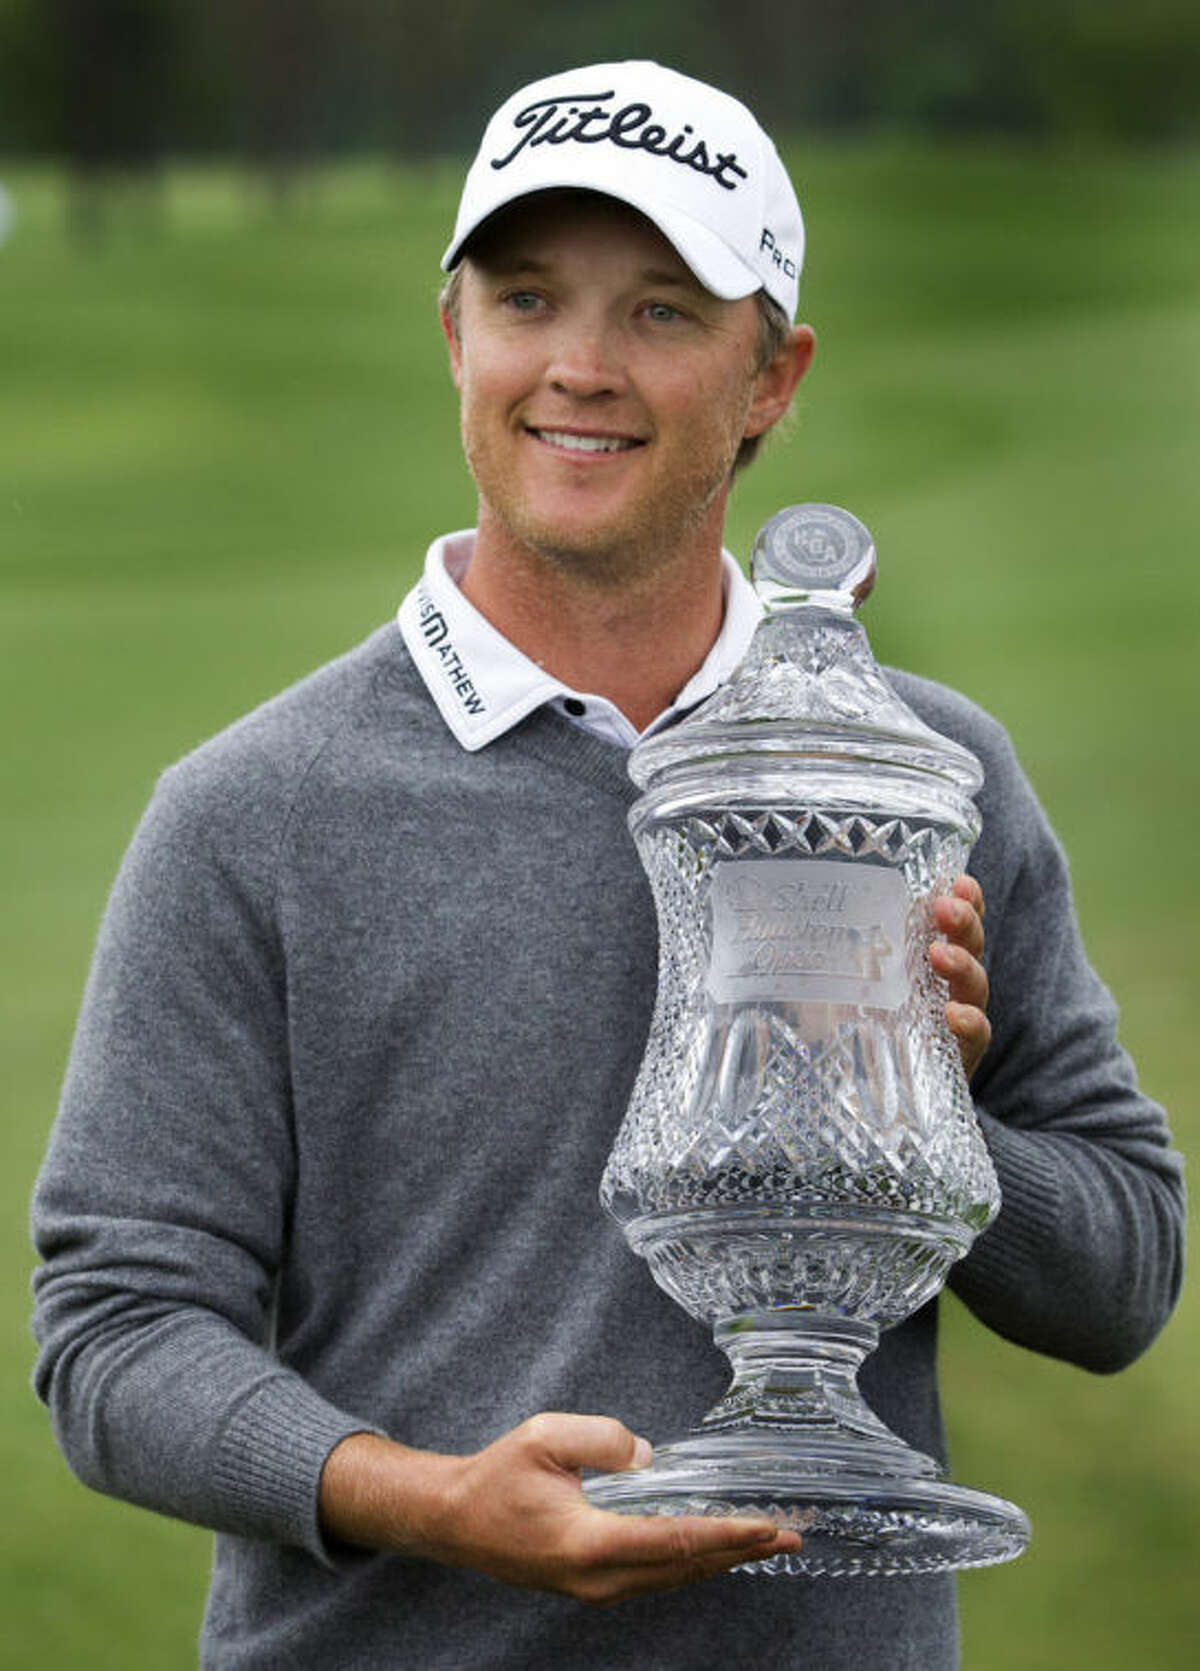 Matt Jones holds the championship trophy after winning the Houston Open golf tournament on Sunday, April 6, 2014, in Humble, Texas. (AP Photo/Patric Schneider)